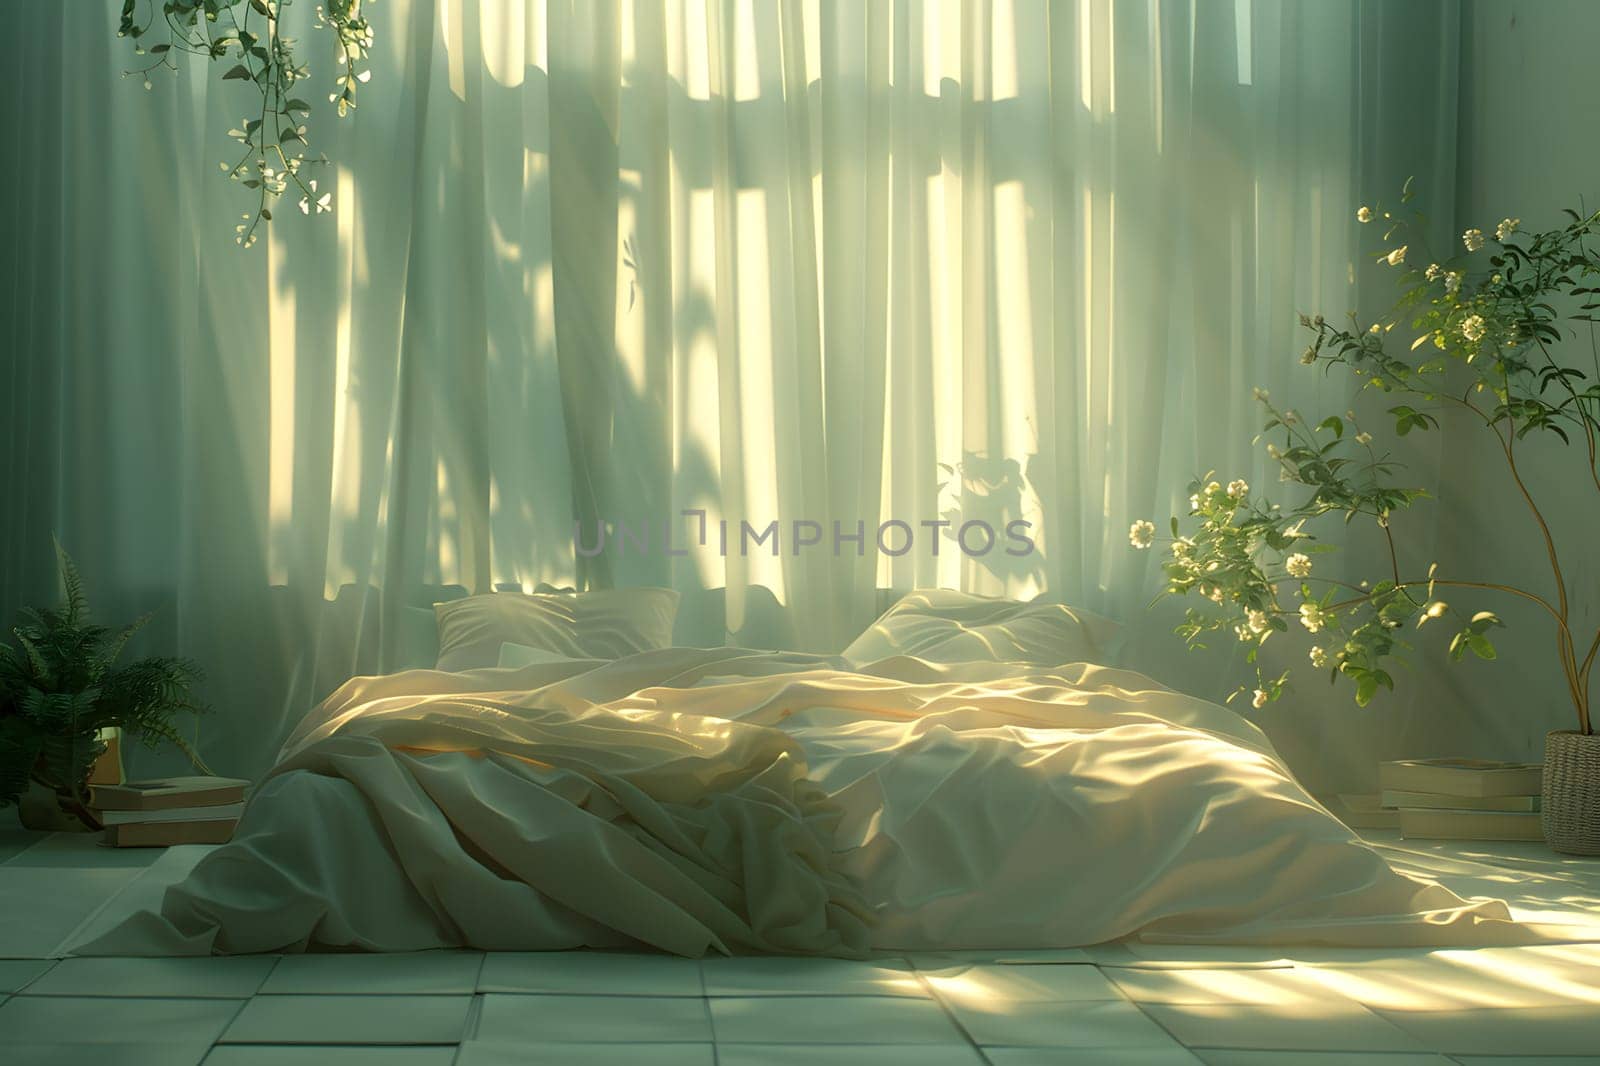 A comfortable bed in a room with a window showcasing sunlight streaming in, curtains made of textile, a painting on the wall, and a terrestrial plant adding a touch of nature to the interior design